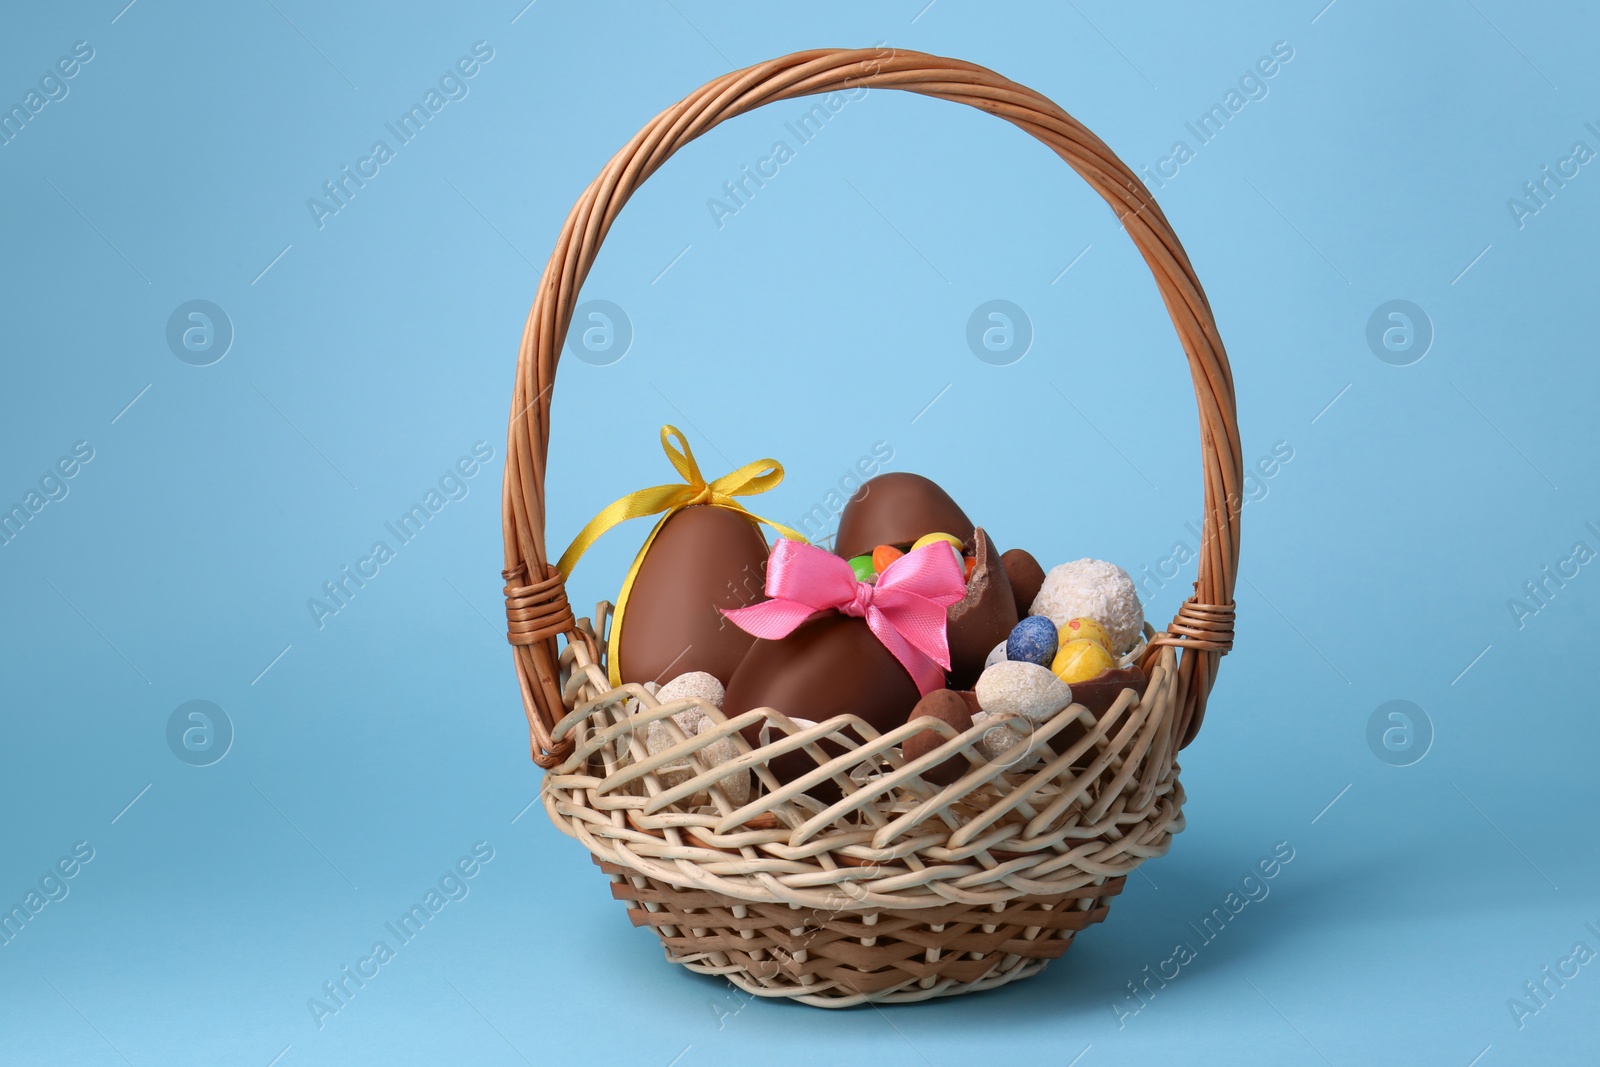 Photo of Wicker basket with tasty chocolate Easter eggs and different candies on light blue background